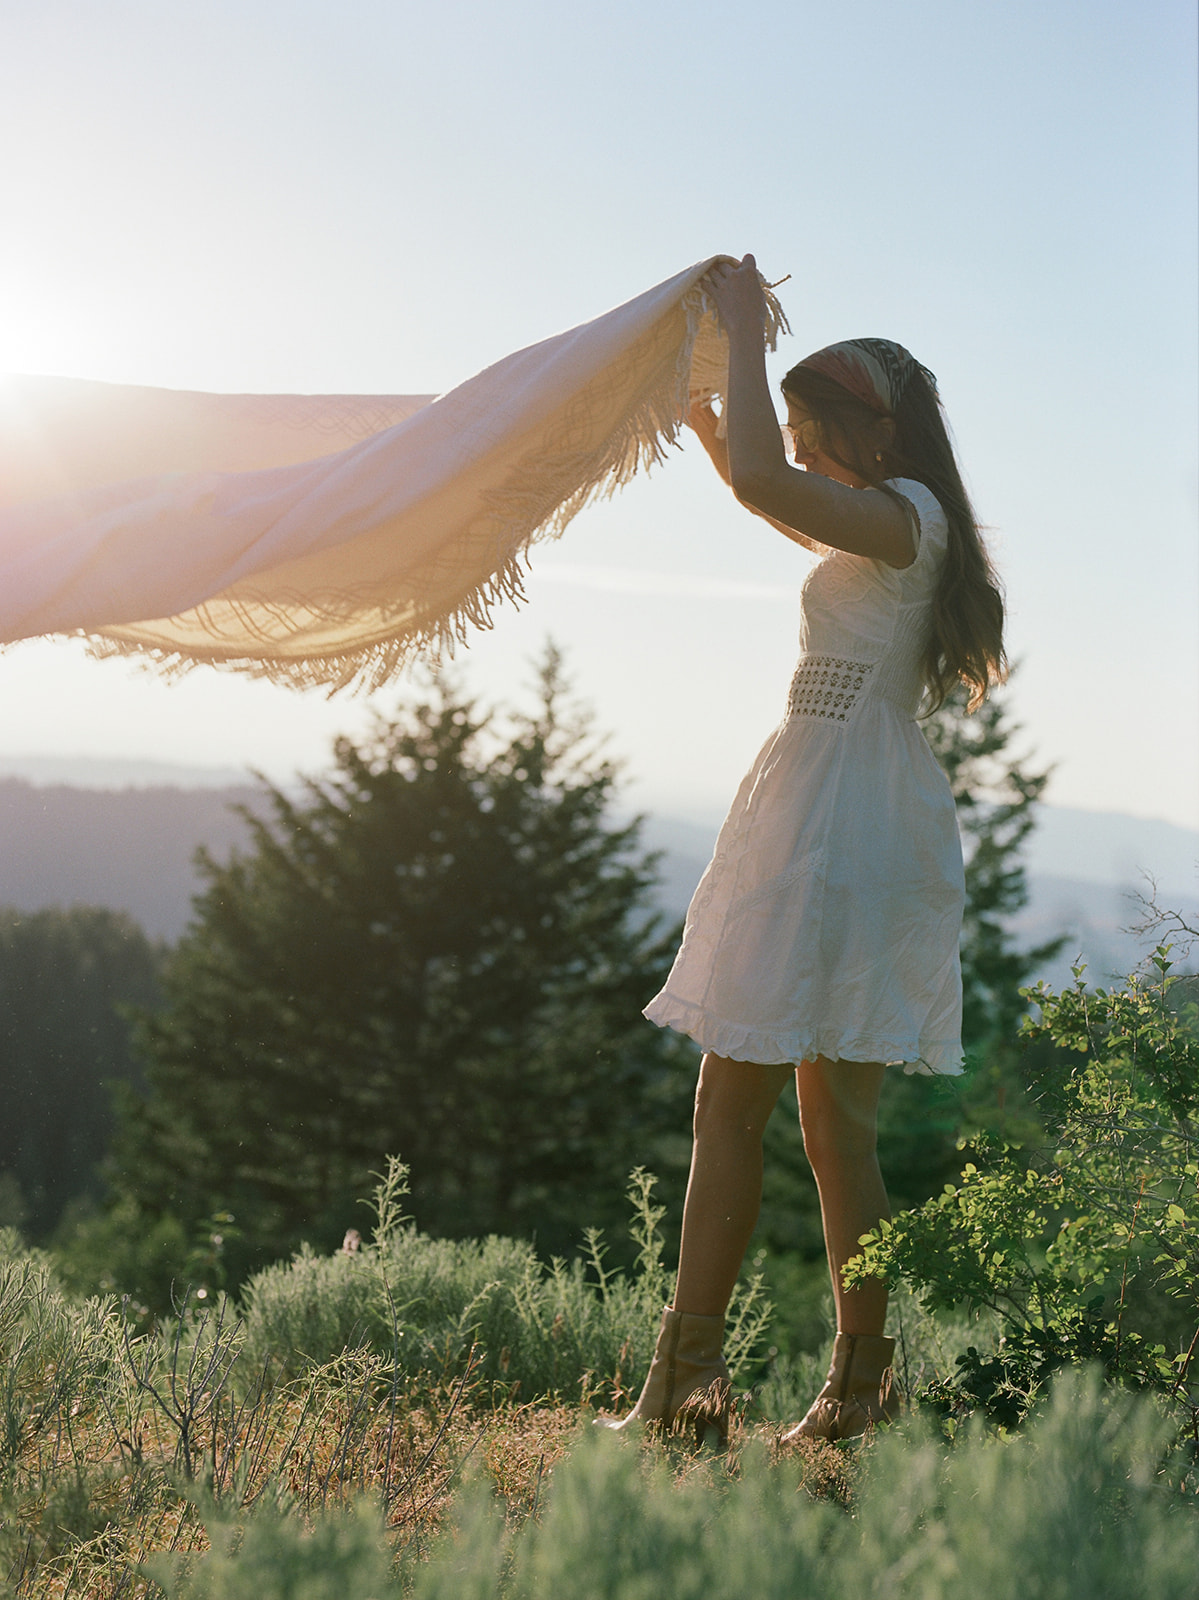 A woman setting up a picnic photoshoot. She is a wearing a white dress. The scenic area is a grass field in Utah.